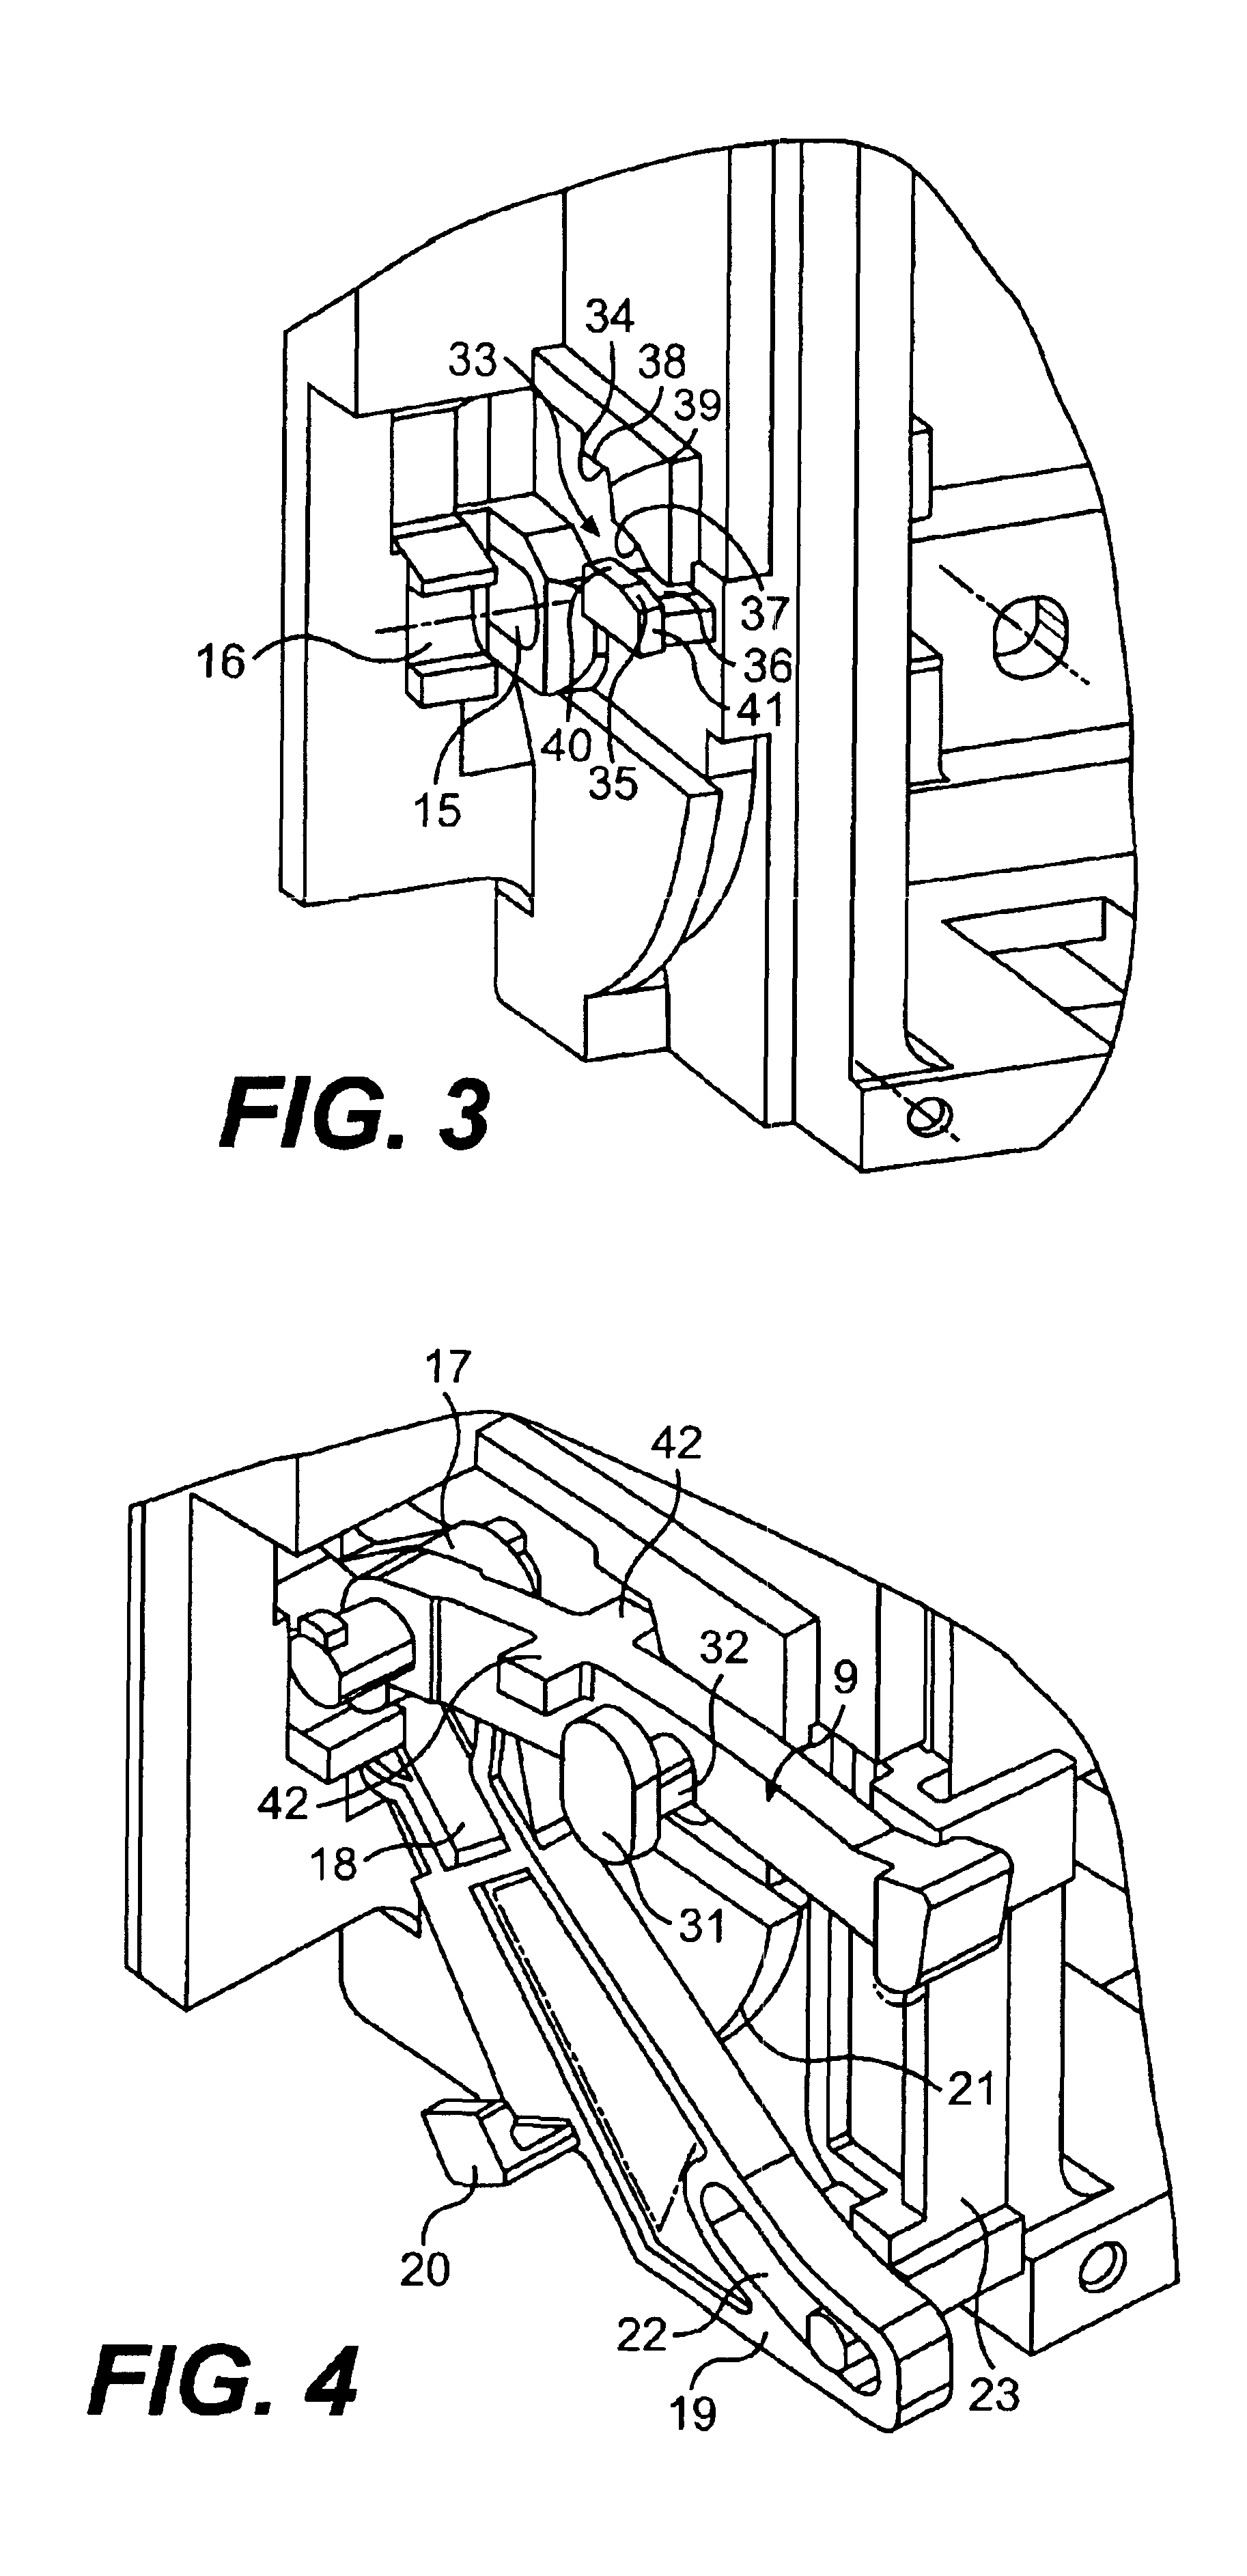 Protective unit to prevent contact with conductive contacts in a withdrawable space of switching device